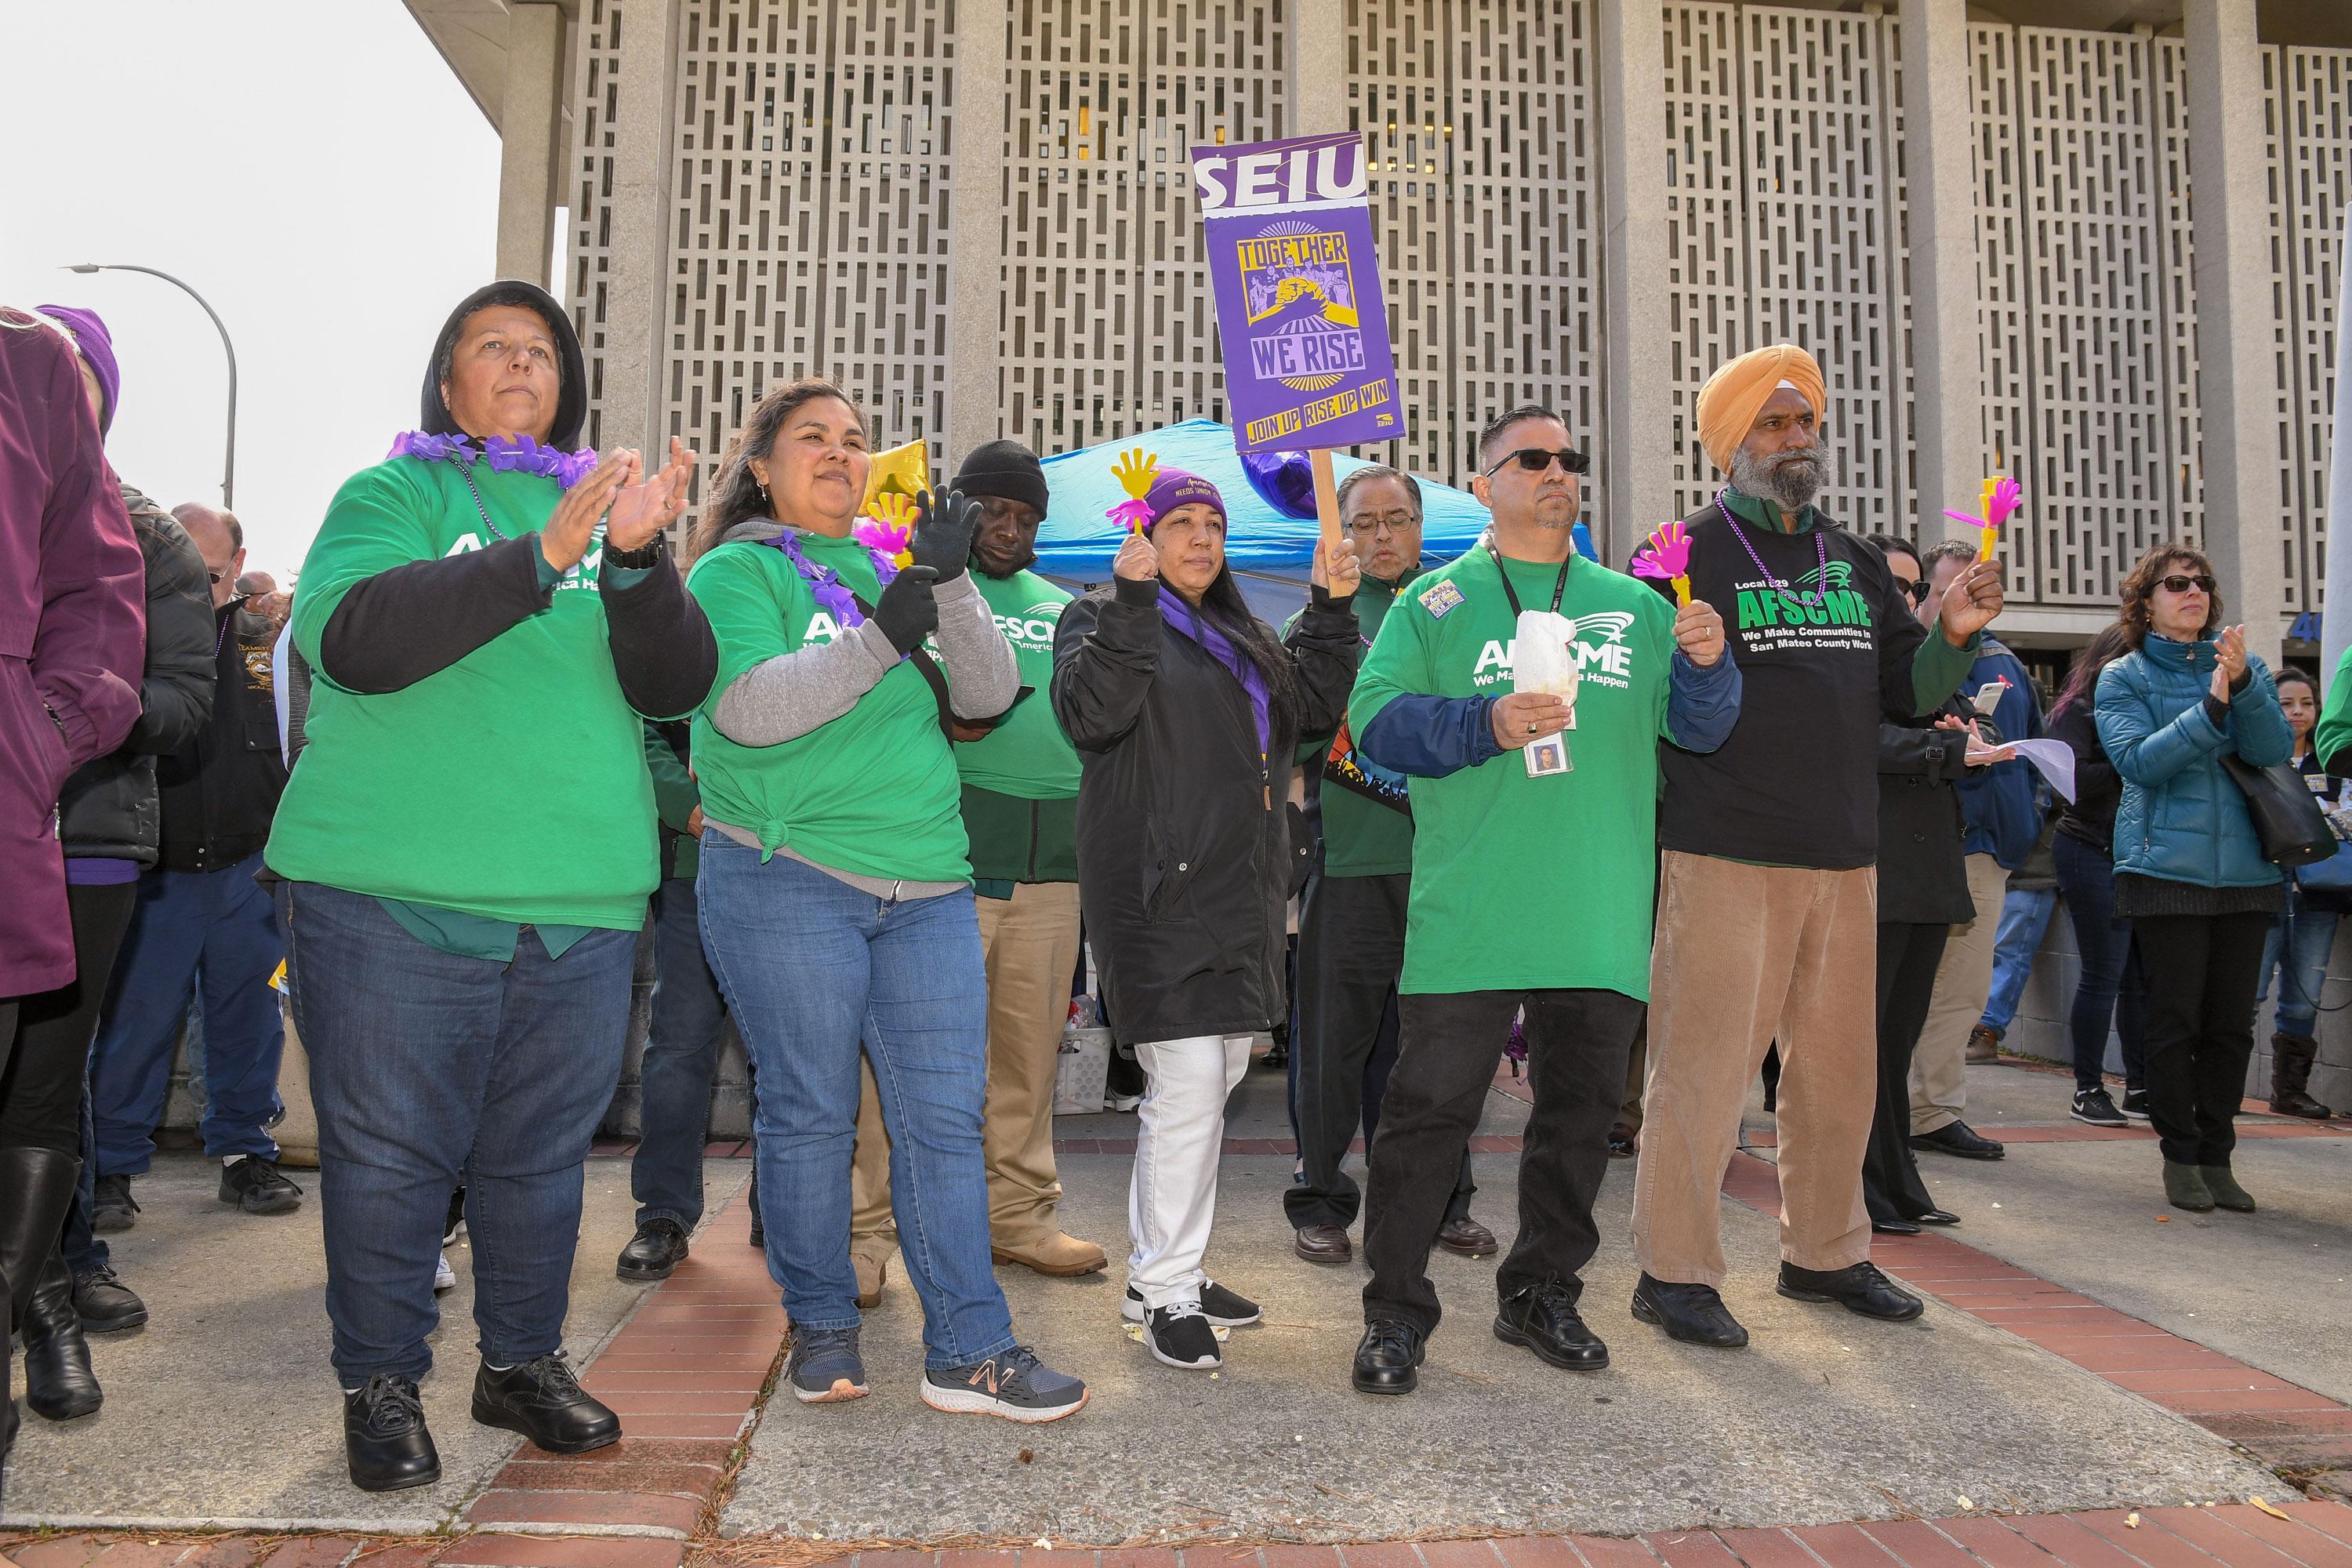 AFSCME Local 829 members and SEIU members listen to speakers at the Together We Rise rally in San Mateo County.